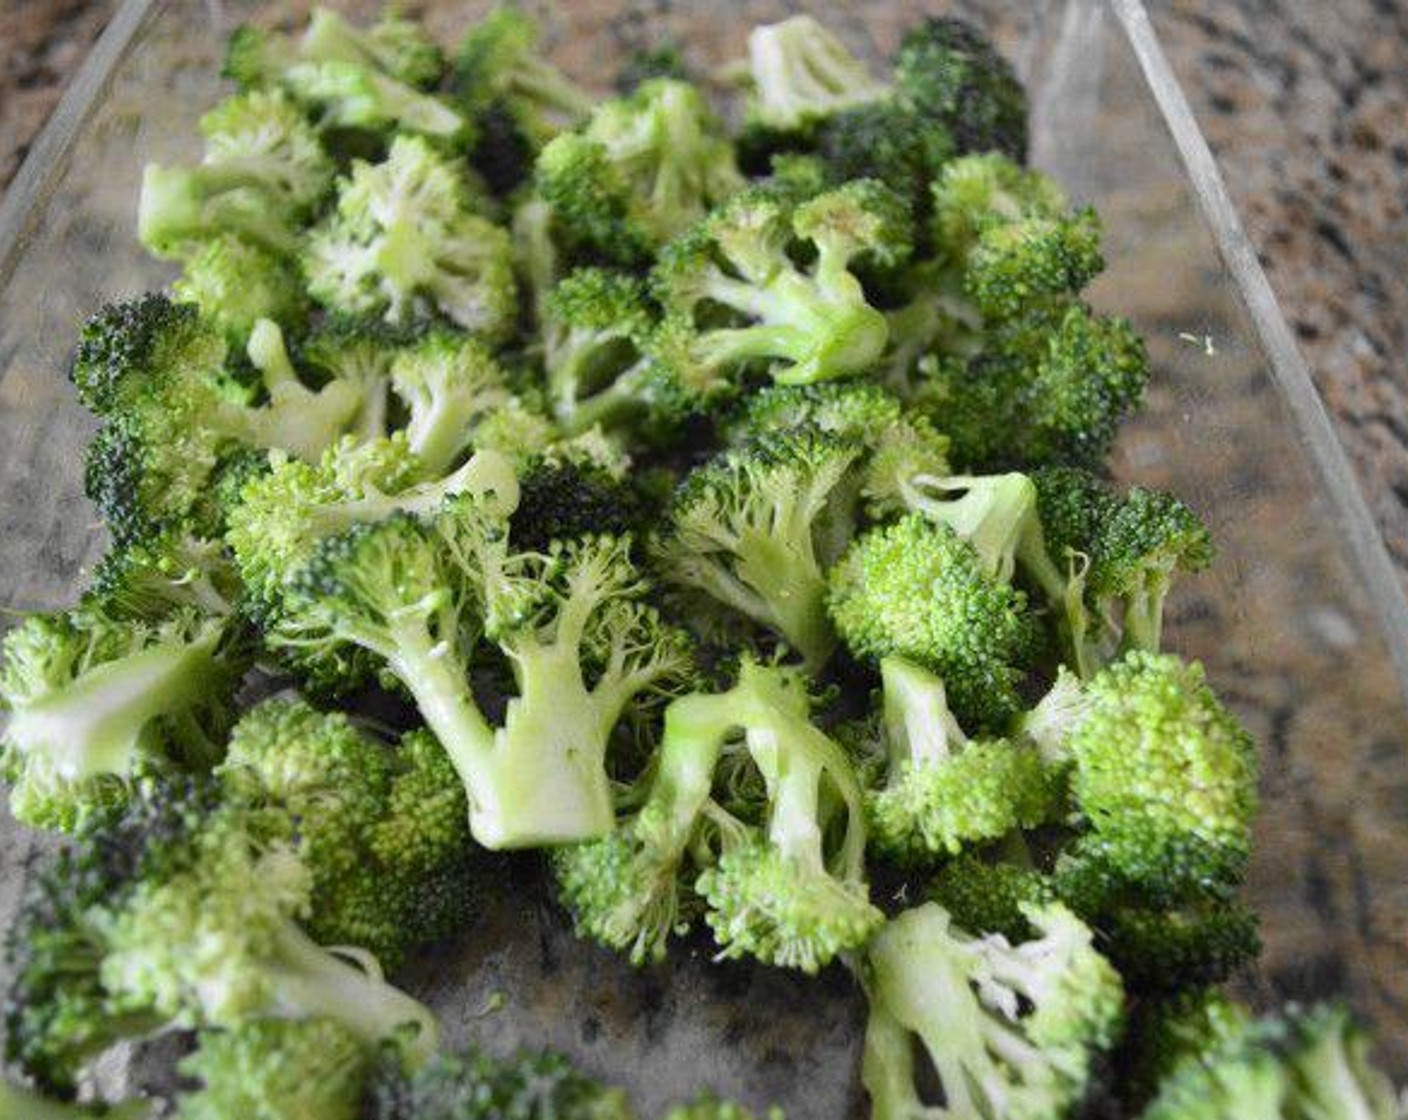 step 3 Transfer the Broccoli (1 head) florets into a baking dish and give them a generous pinch of Salt (to taste).